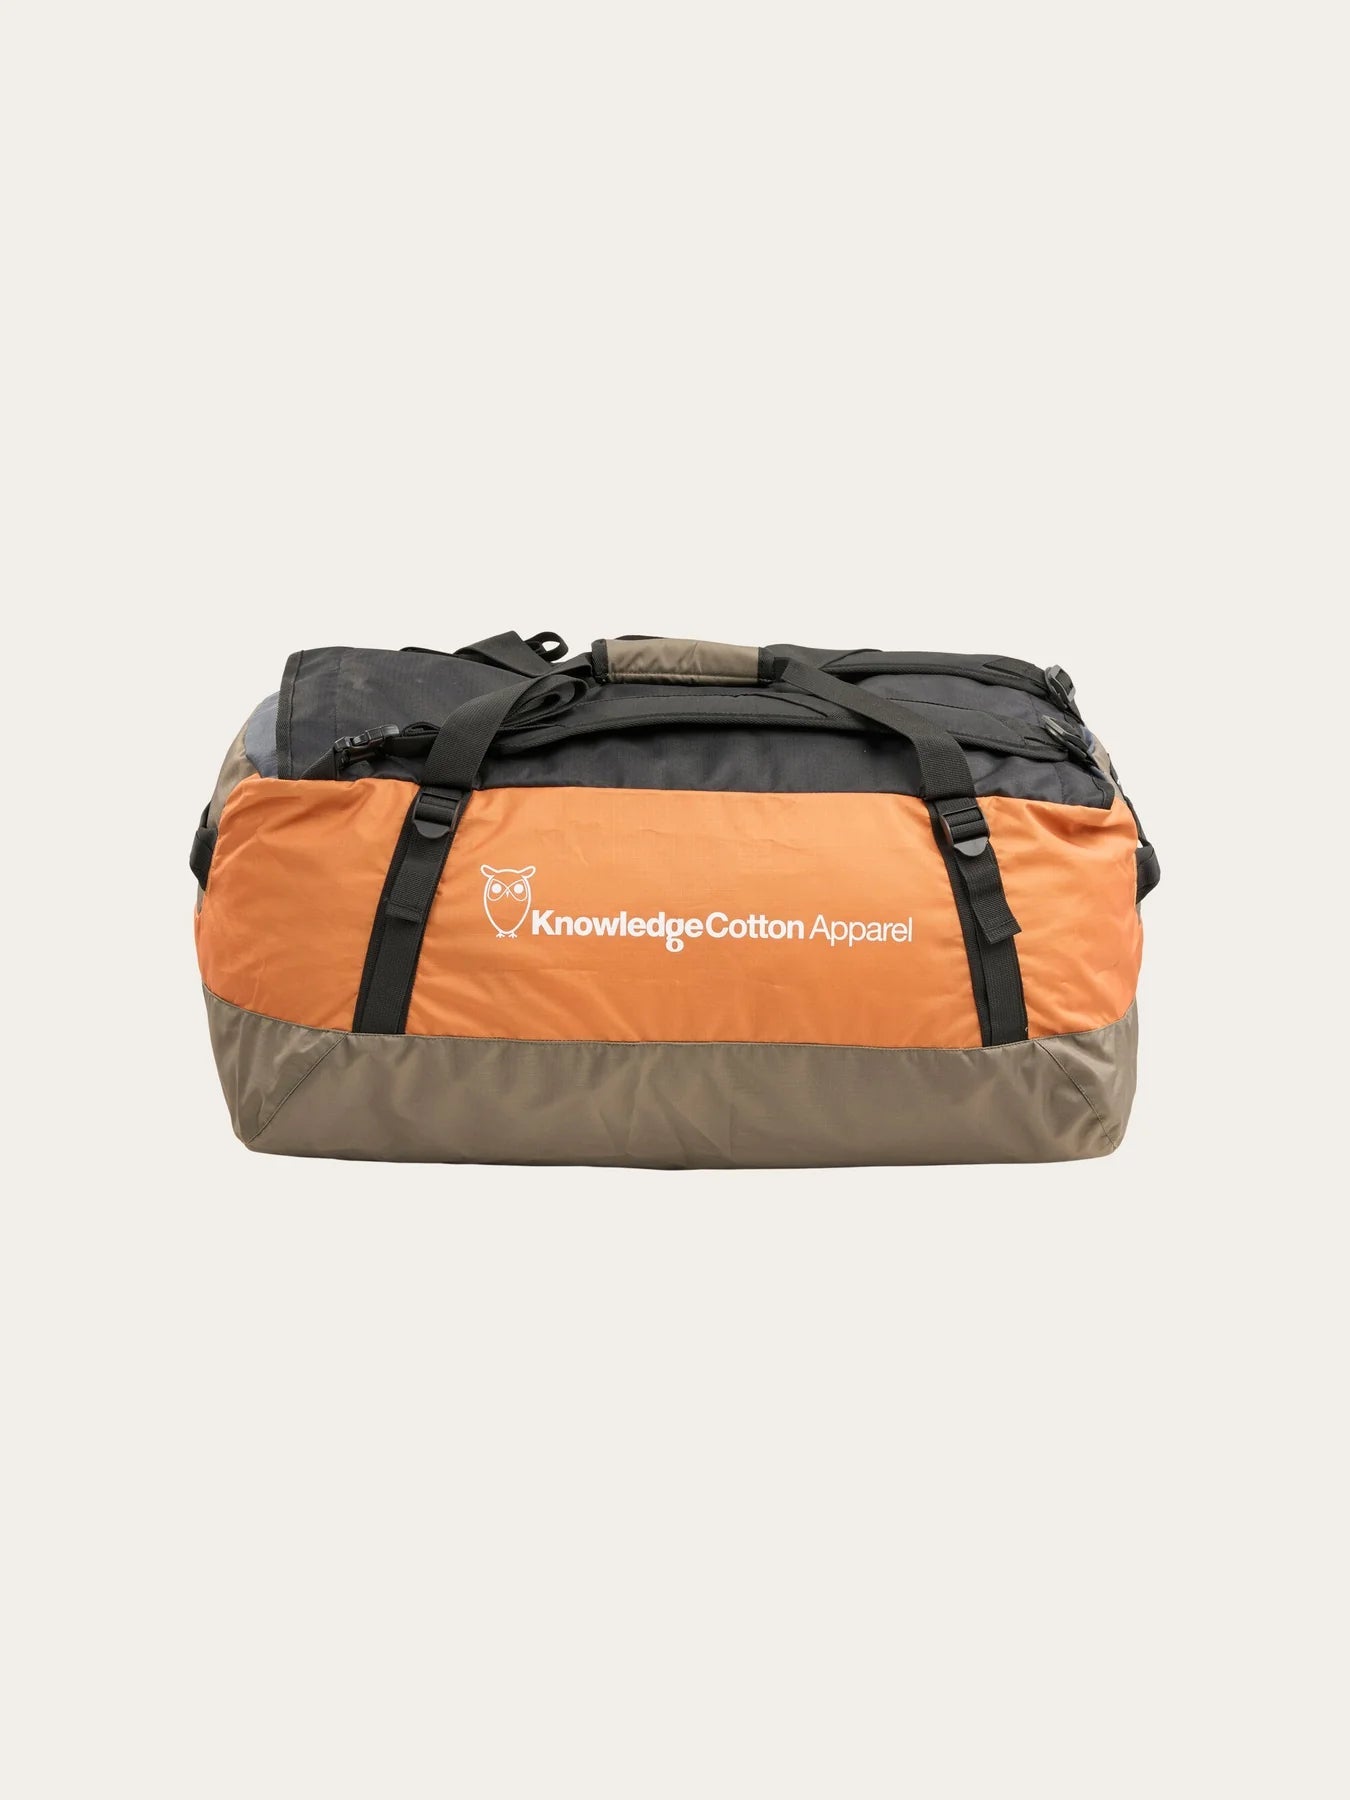 KnowledgeCotton Apparel Packable Duffel Backpack 50L - Recycled PET Desert Sun Bags